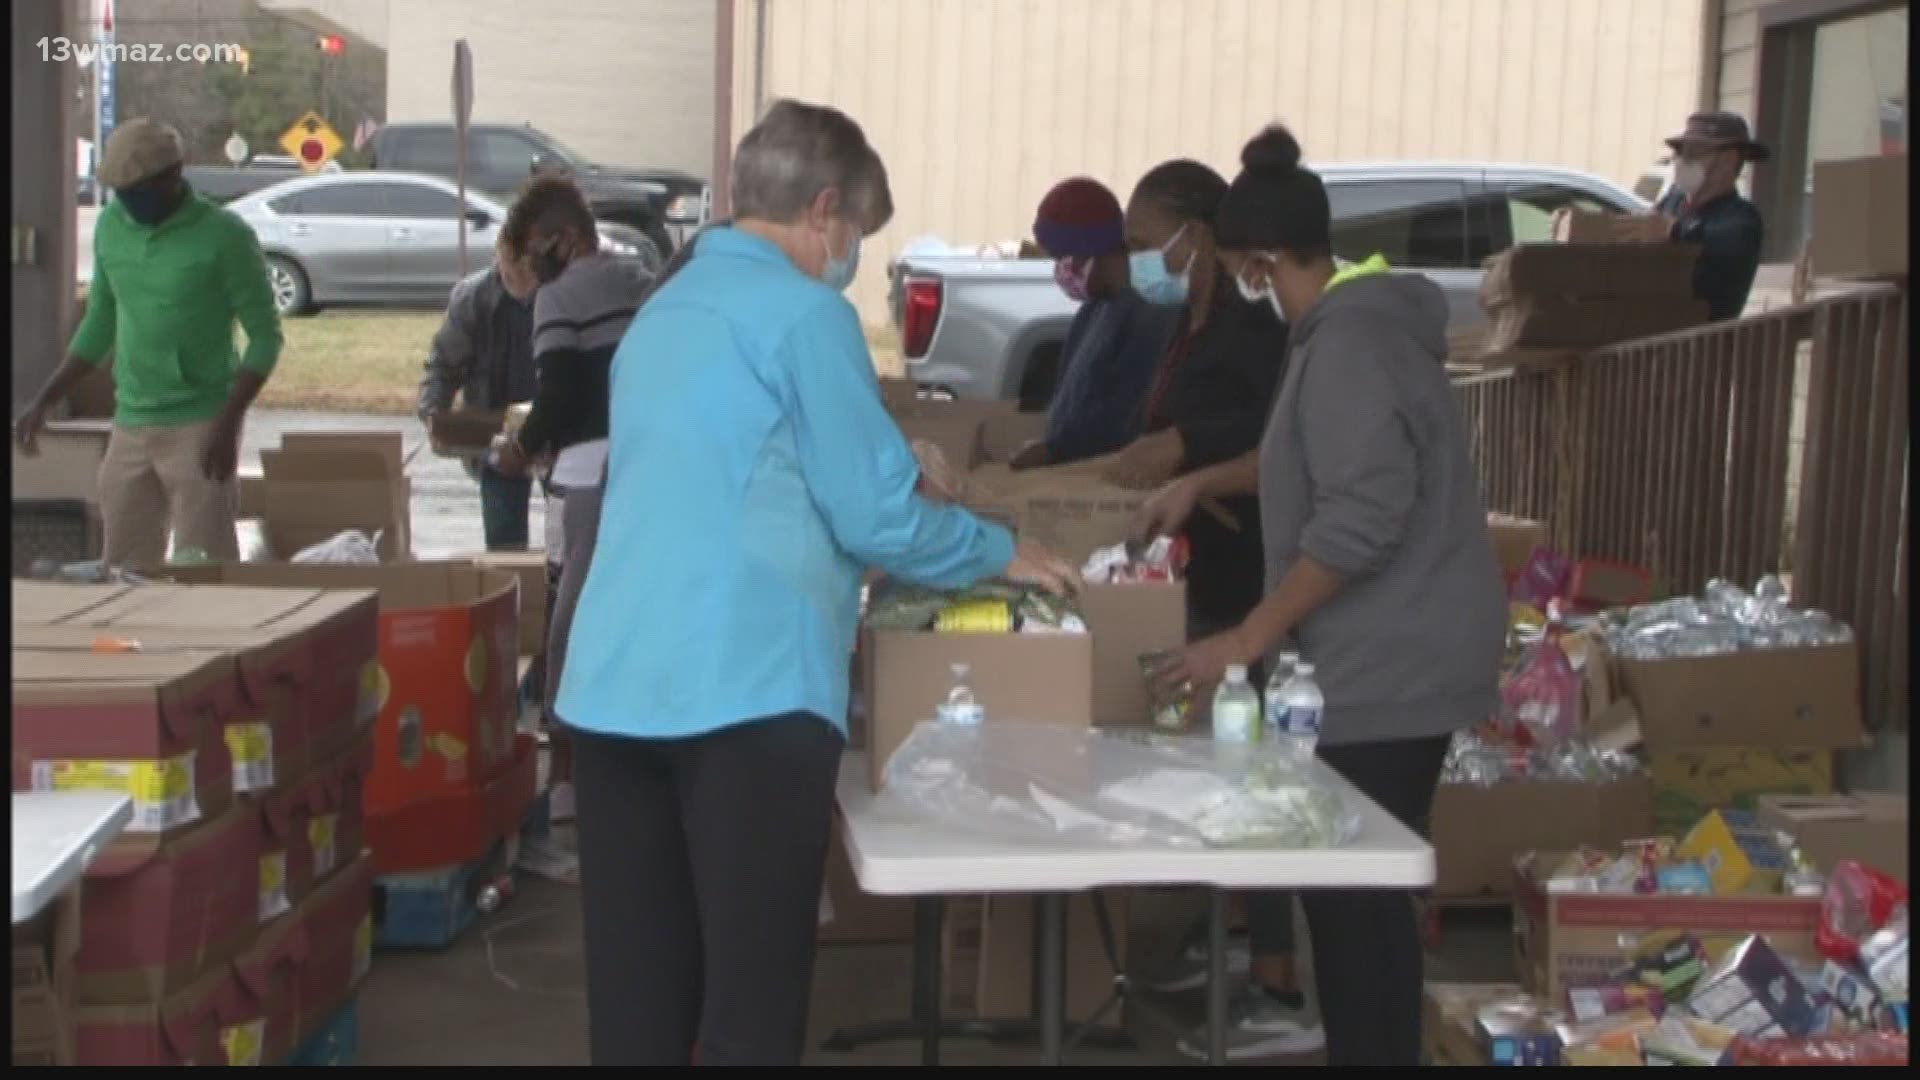 Greater Jordan Chapel AME Church held their monthly food giveaway on Bowen Hill Drive in Haddock Wednesday